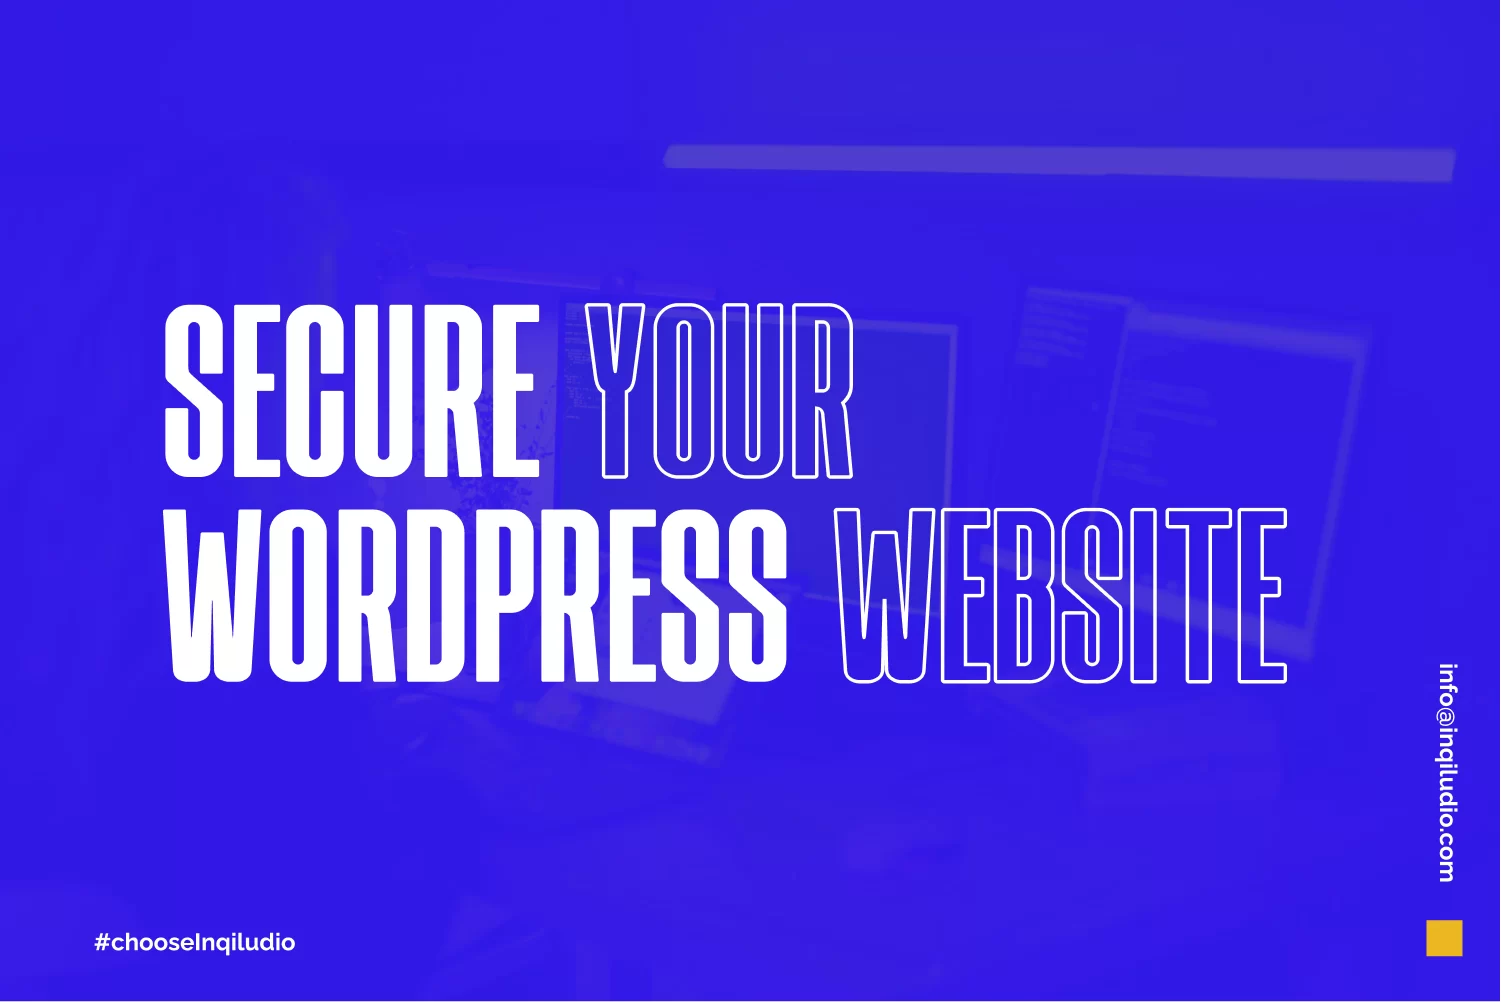 Do You Think Your WordPress Website is Secure? Let’s check it out!